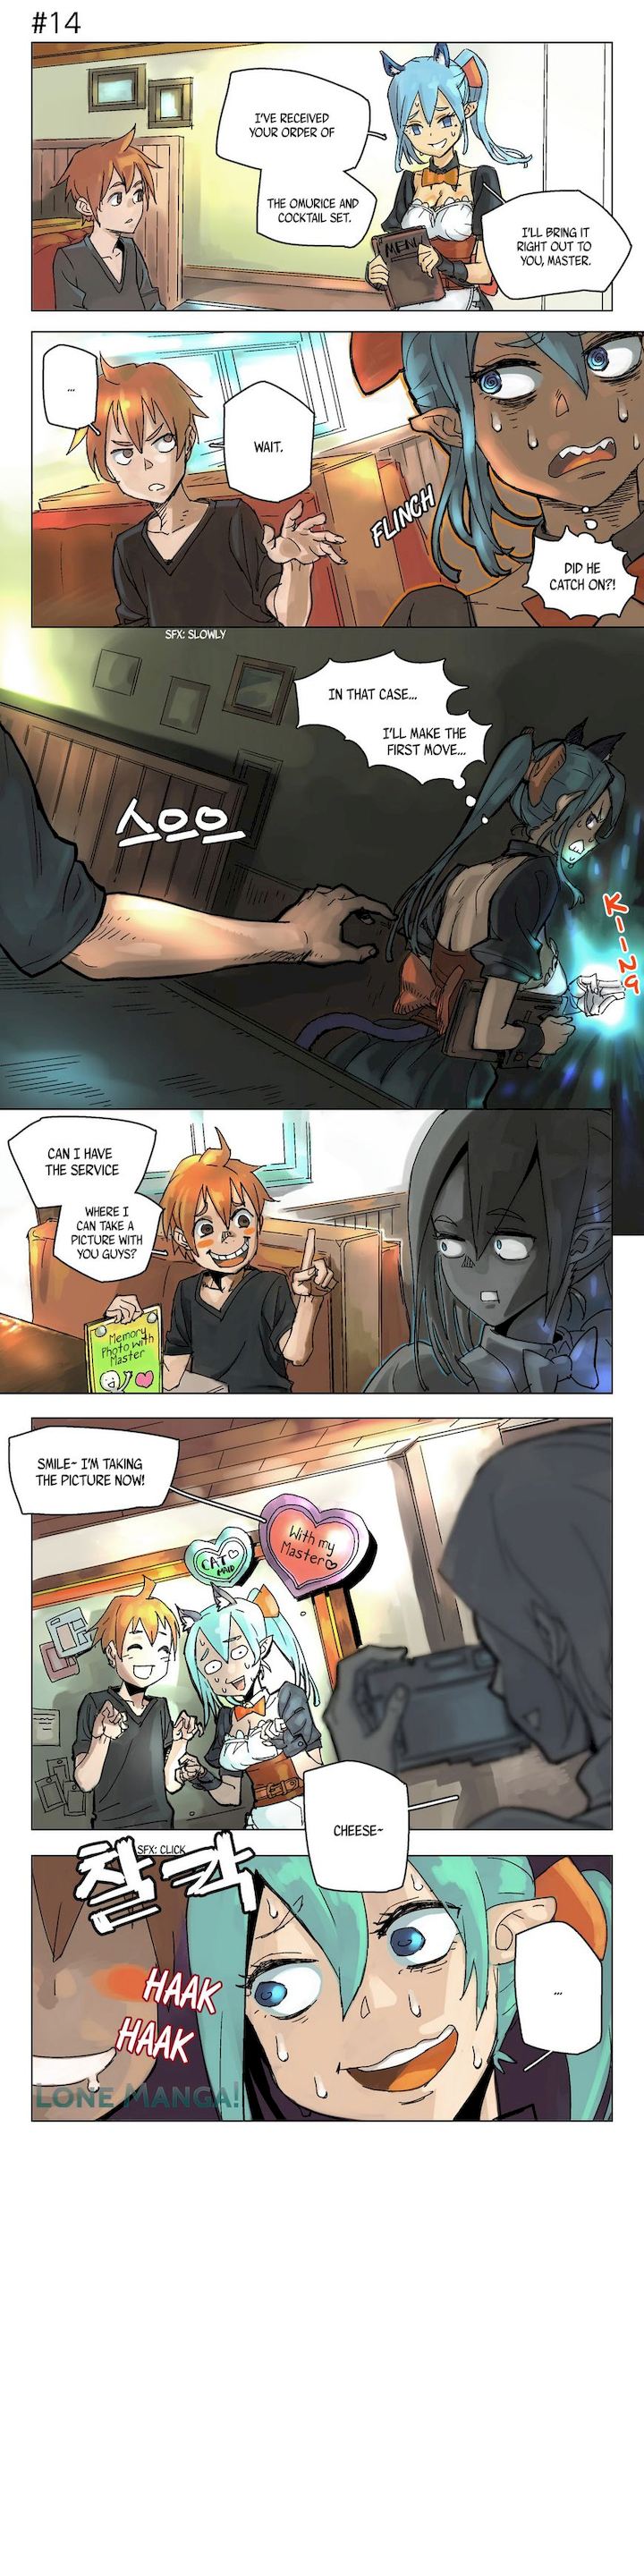 4 Cut Hero - Chapter 2 Page 3